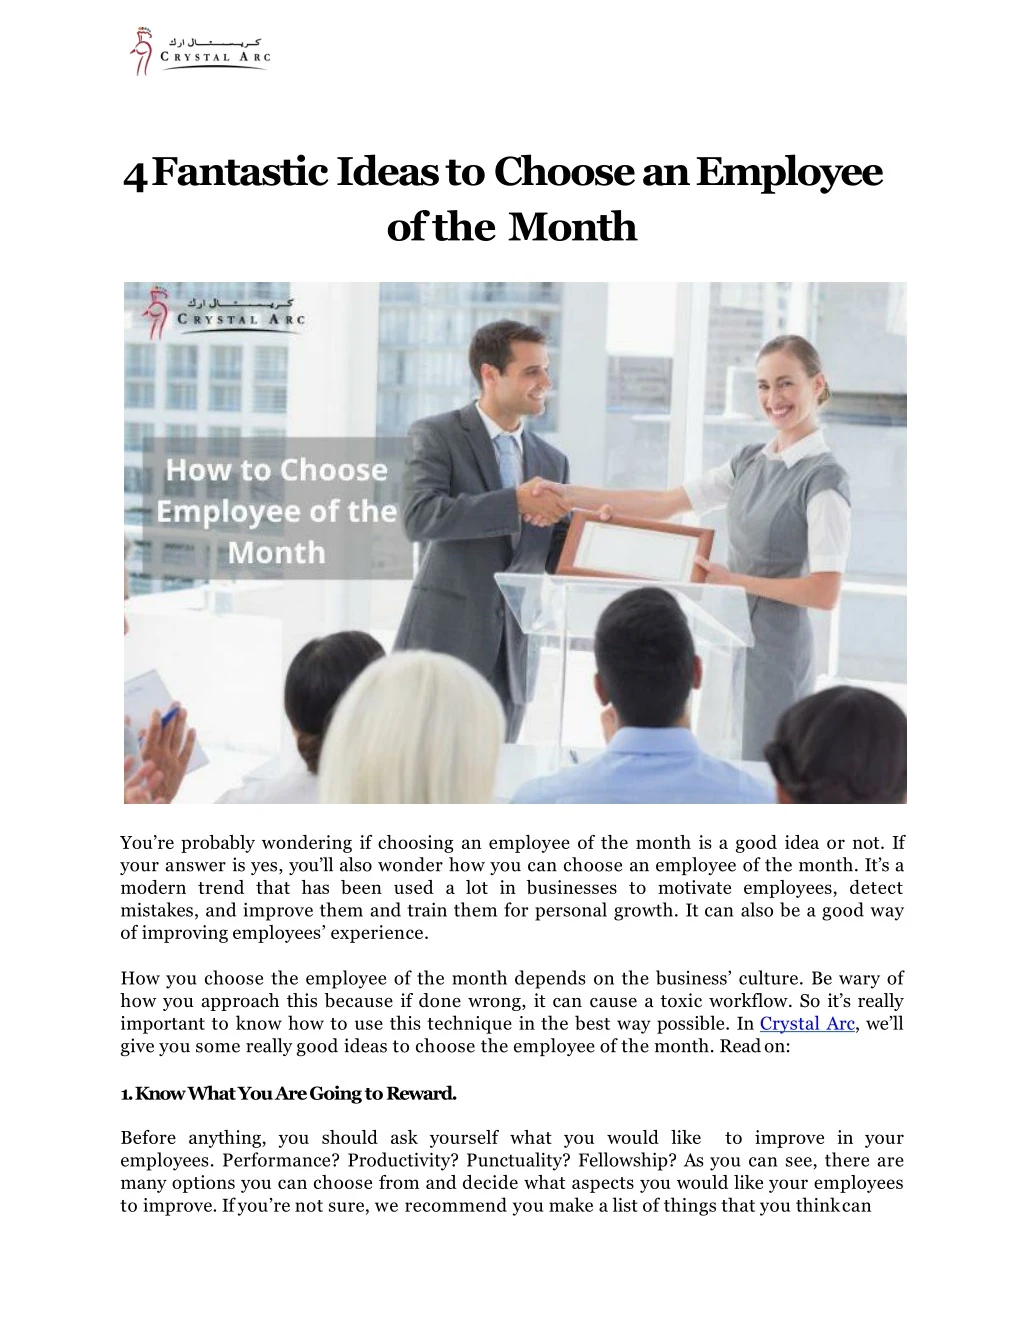 4 fantastic ideas to choose an employee of the month